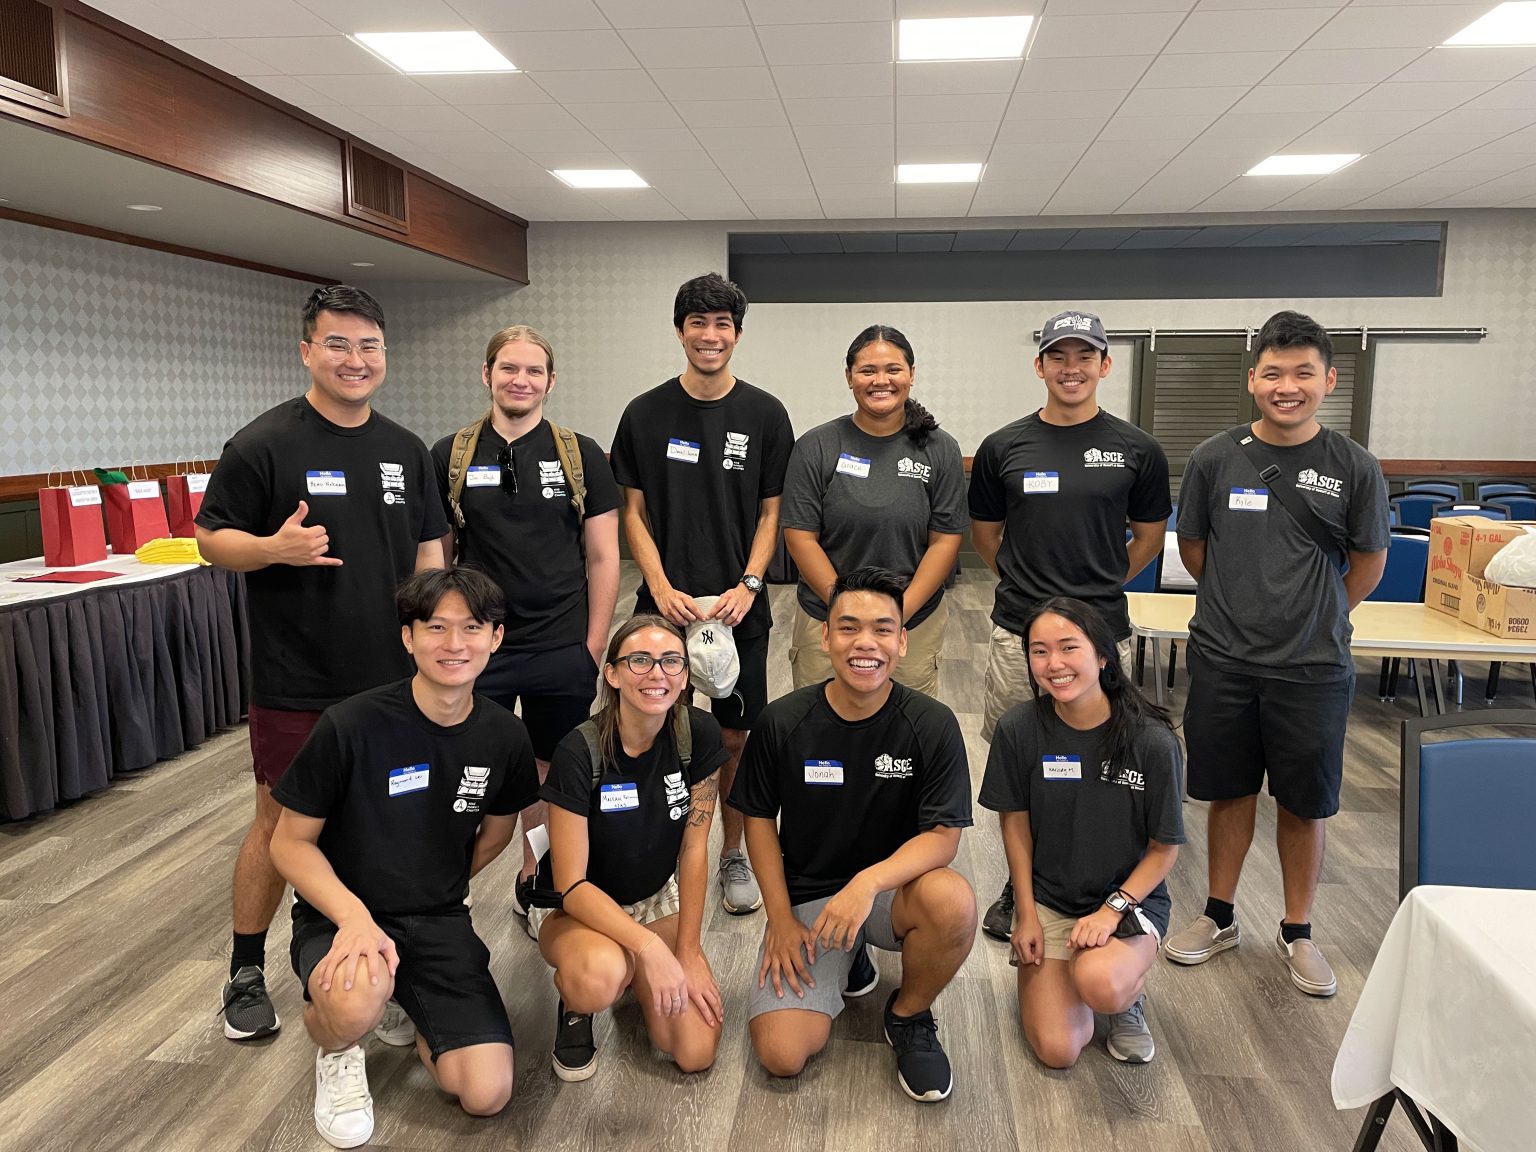 AIAS Hawaiʻi Launched the Upcoming Academic Year Full of Laudable Experiences